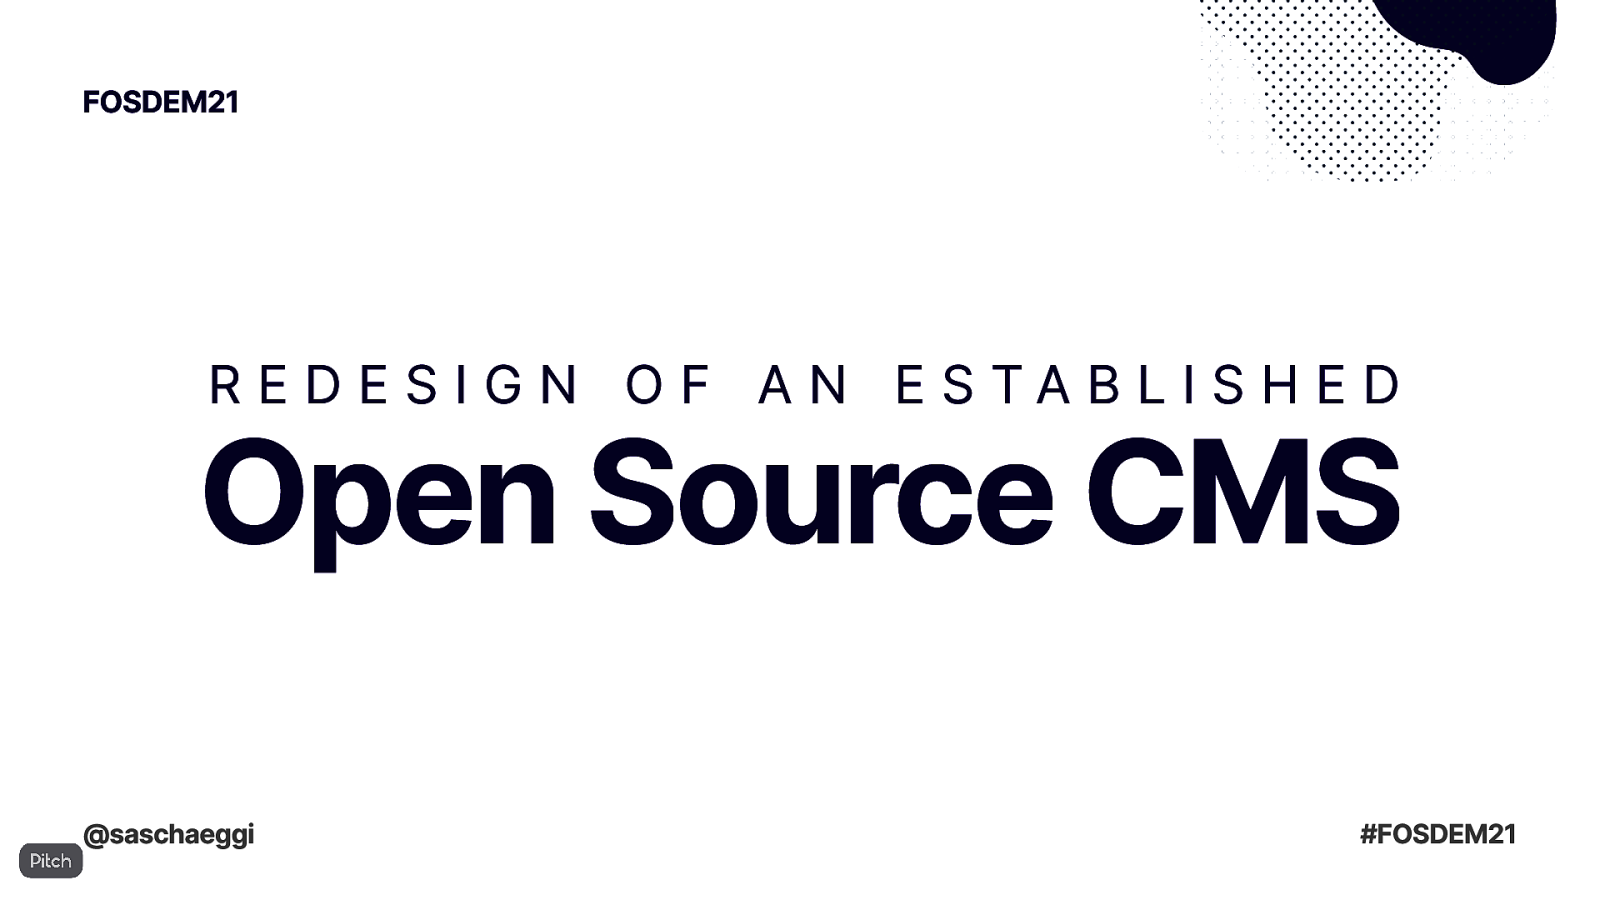 Redesign of an established Open Source CMS